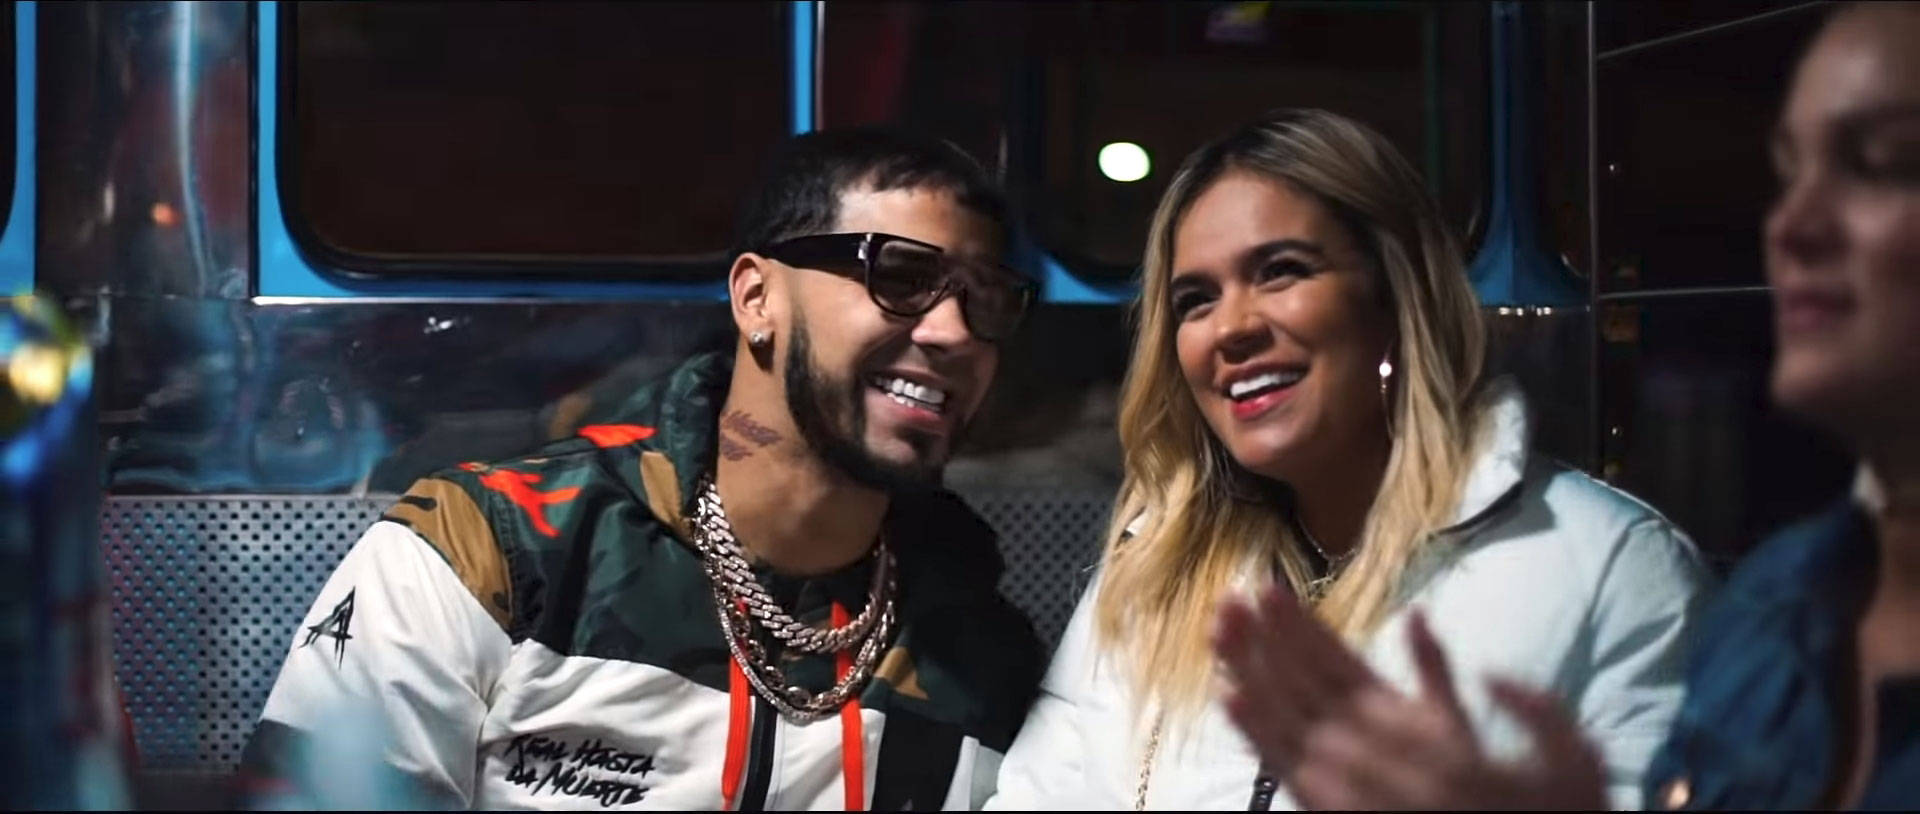 Free Anuel Wallpaper Downloads, [100+] Anuel Wallpapers for FREE |  